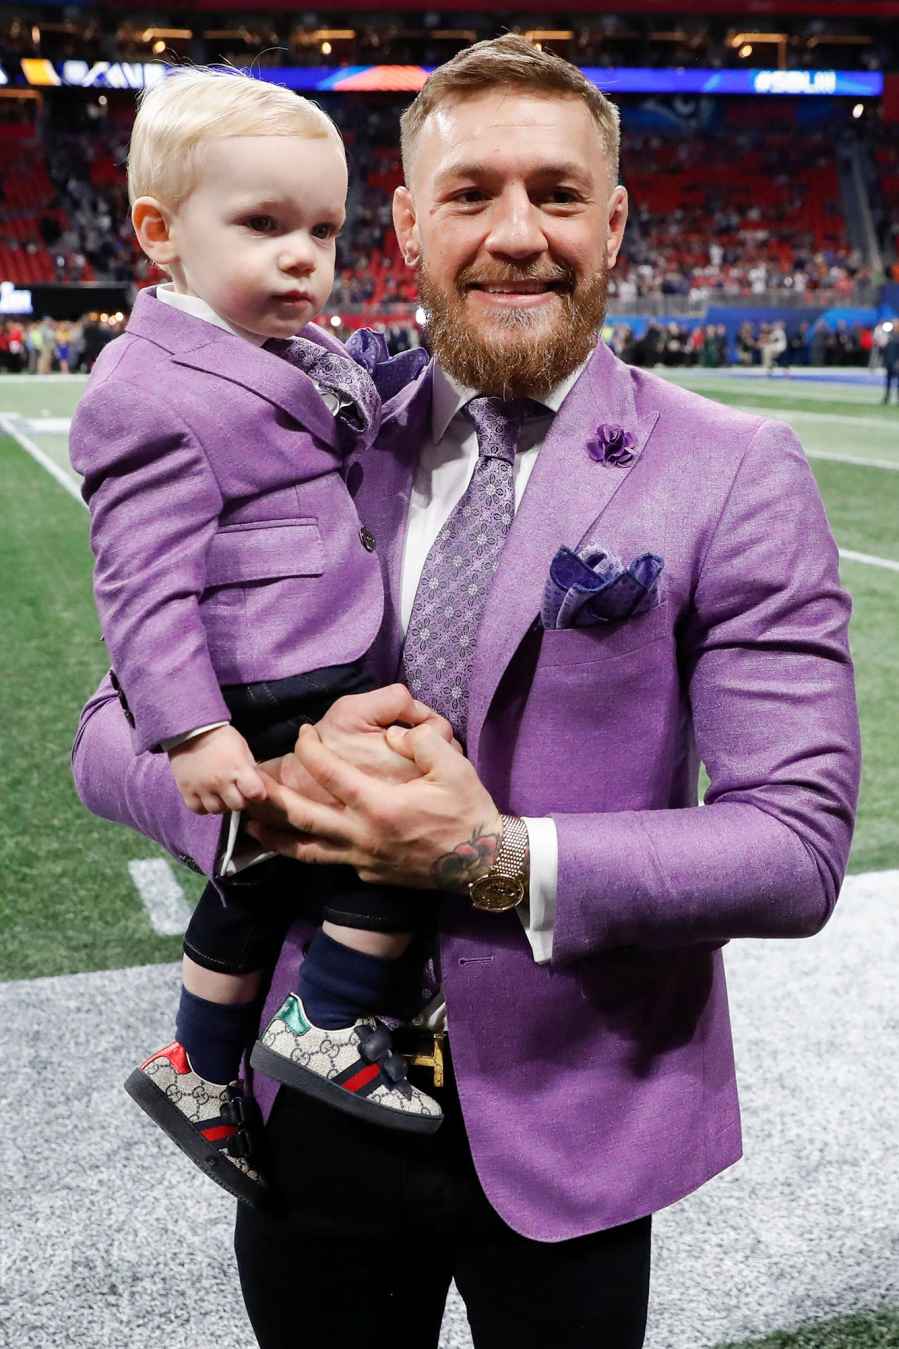 Conor McGregor Stars at the Super Bowl Through the Years